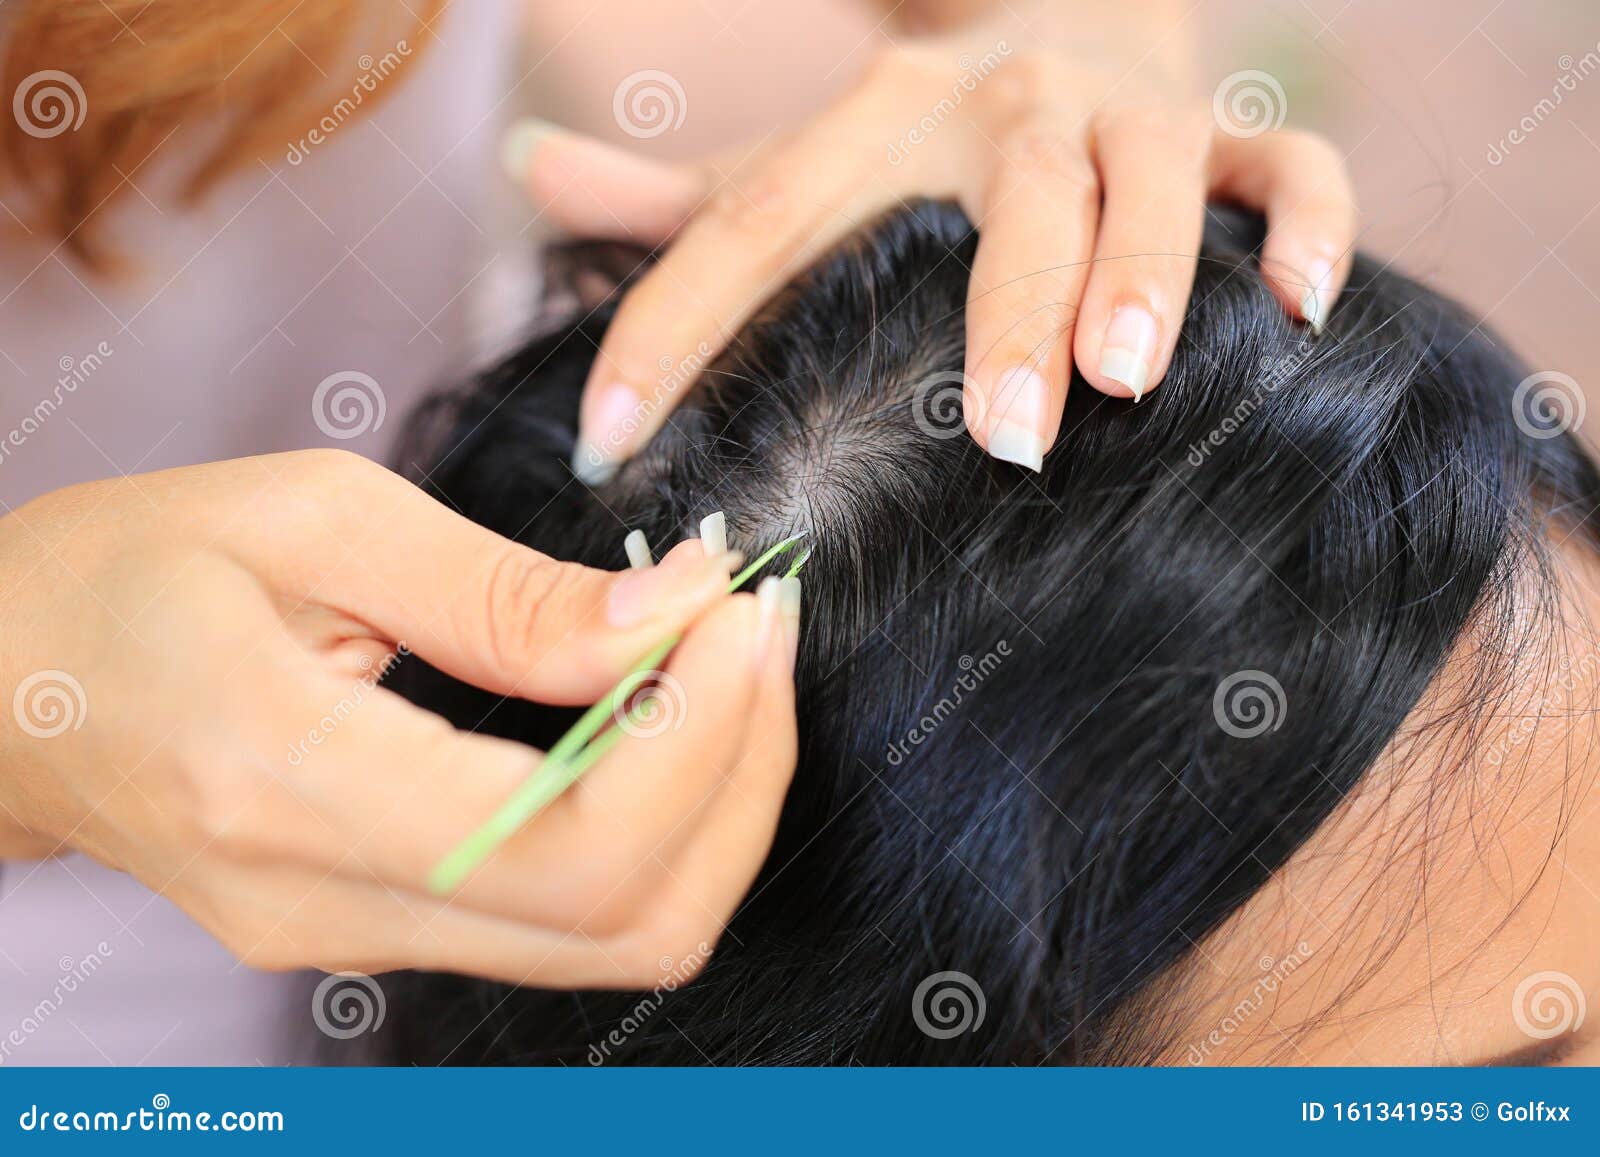 Close Up Woman`s Hand Using Tweezers To Plucking Gray Hair Roots from Head  Stock Image - Image of female, graying: 161341953